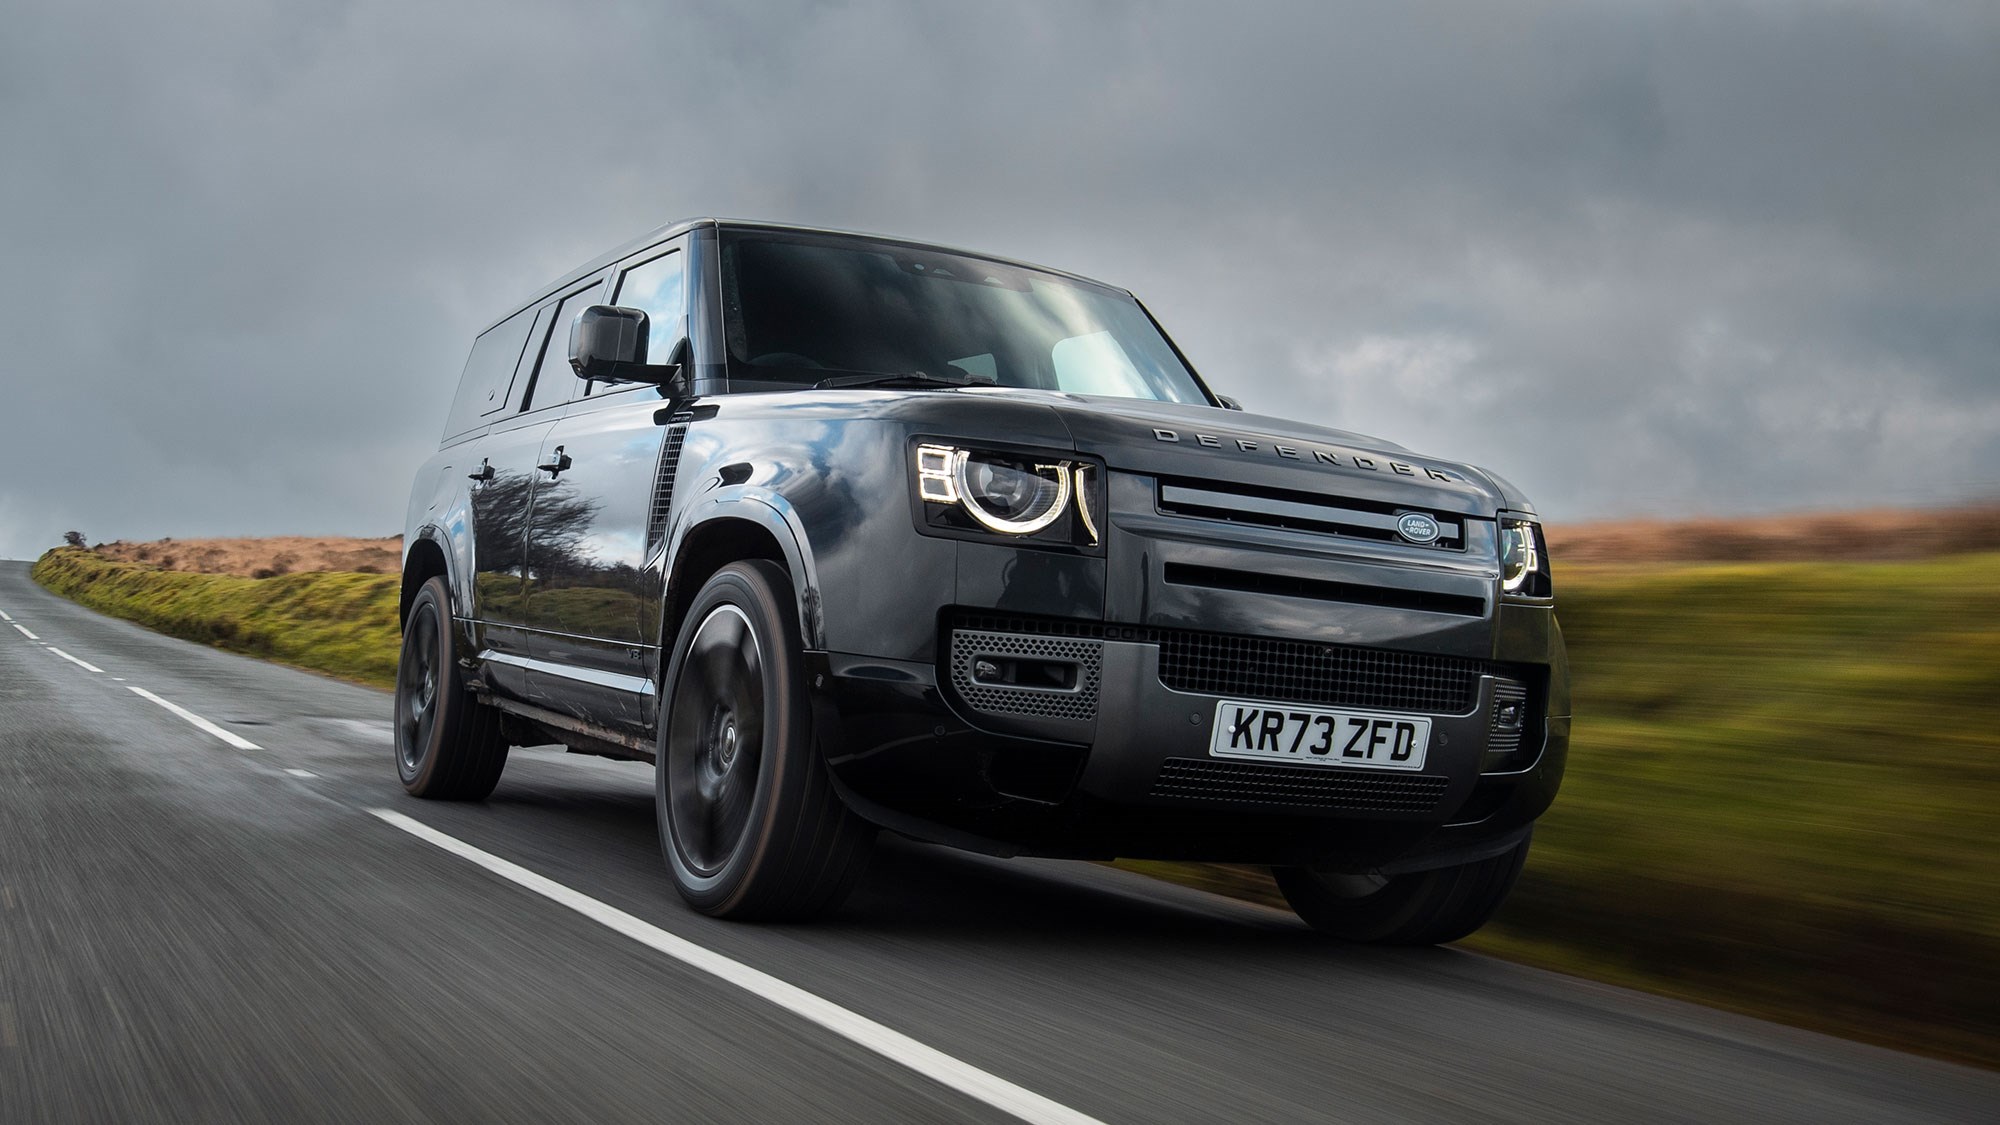 2023 Land Rover Defender 130 Review: More Space, But a Tight